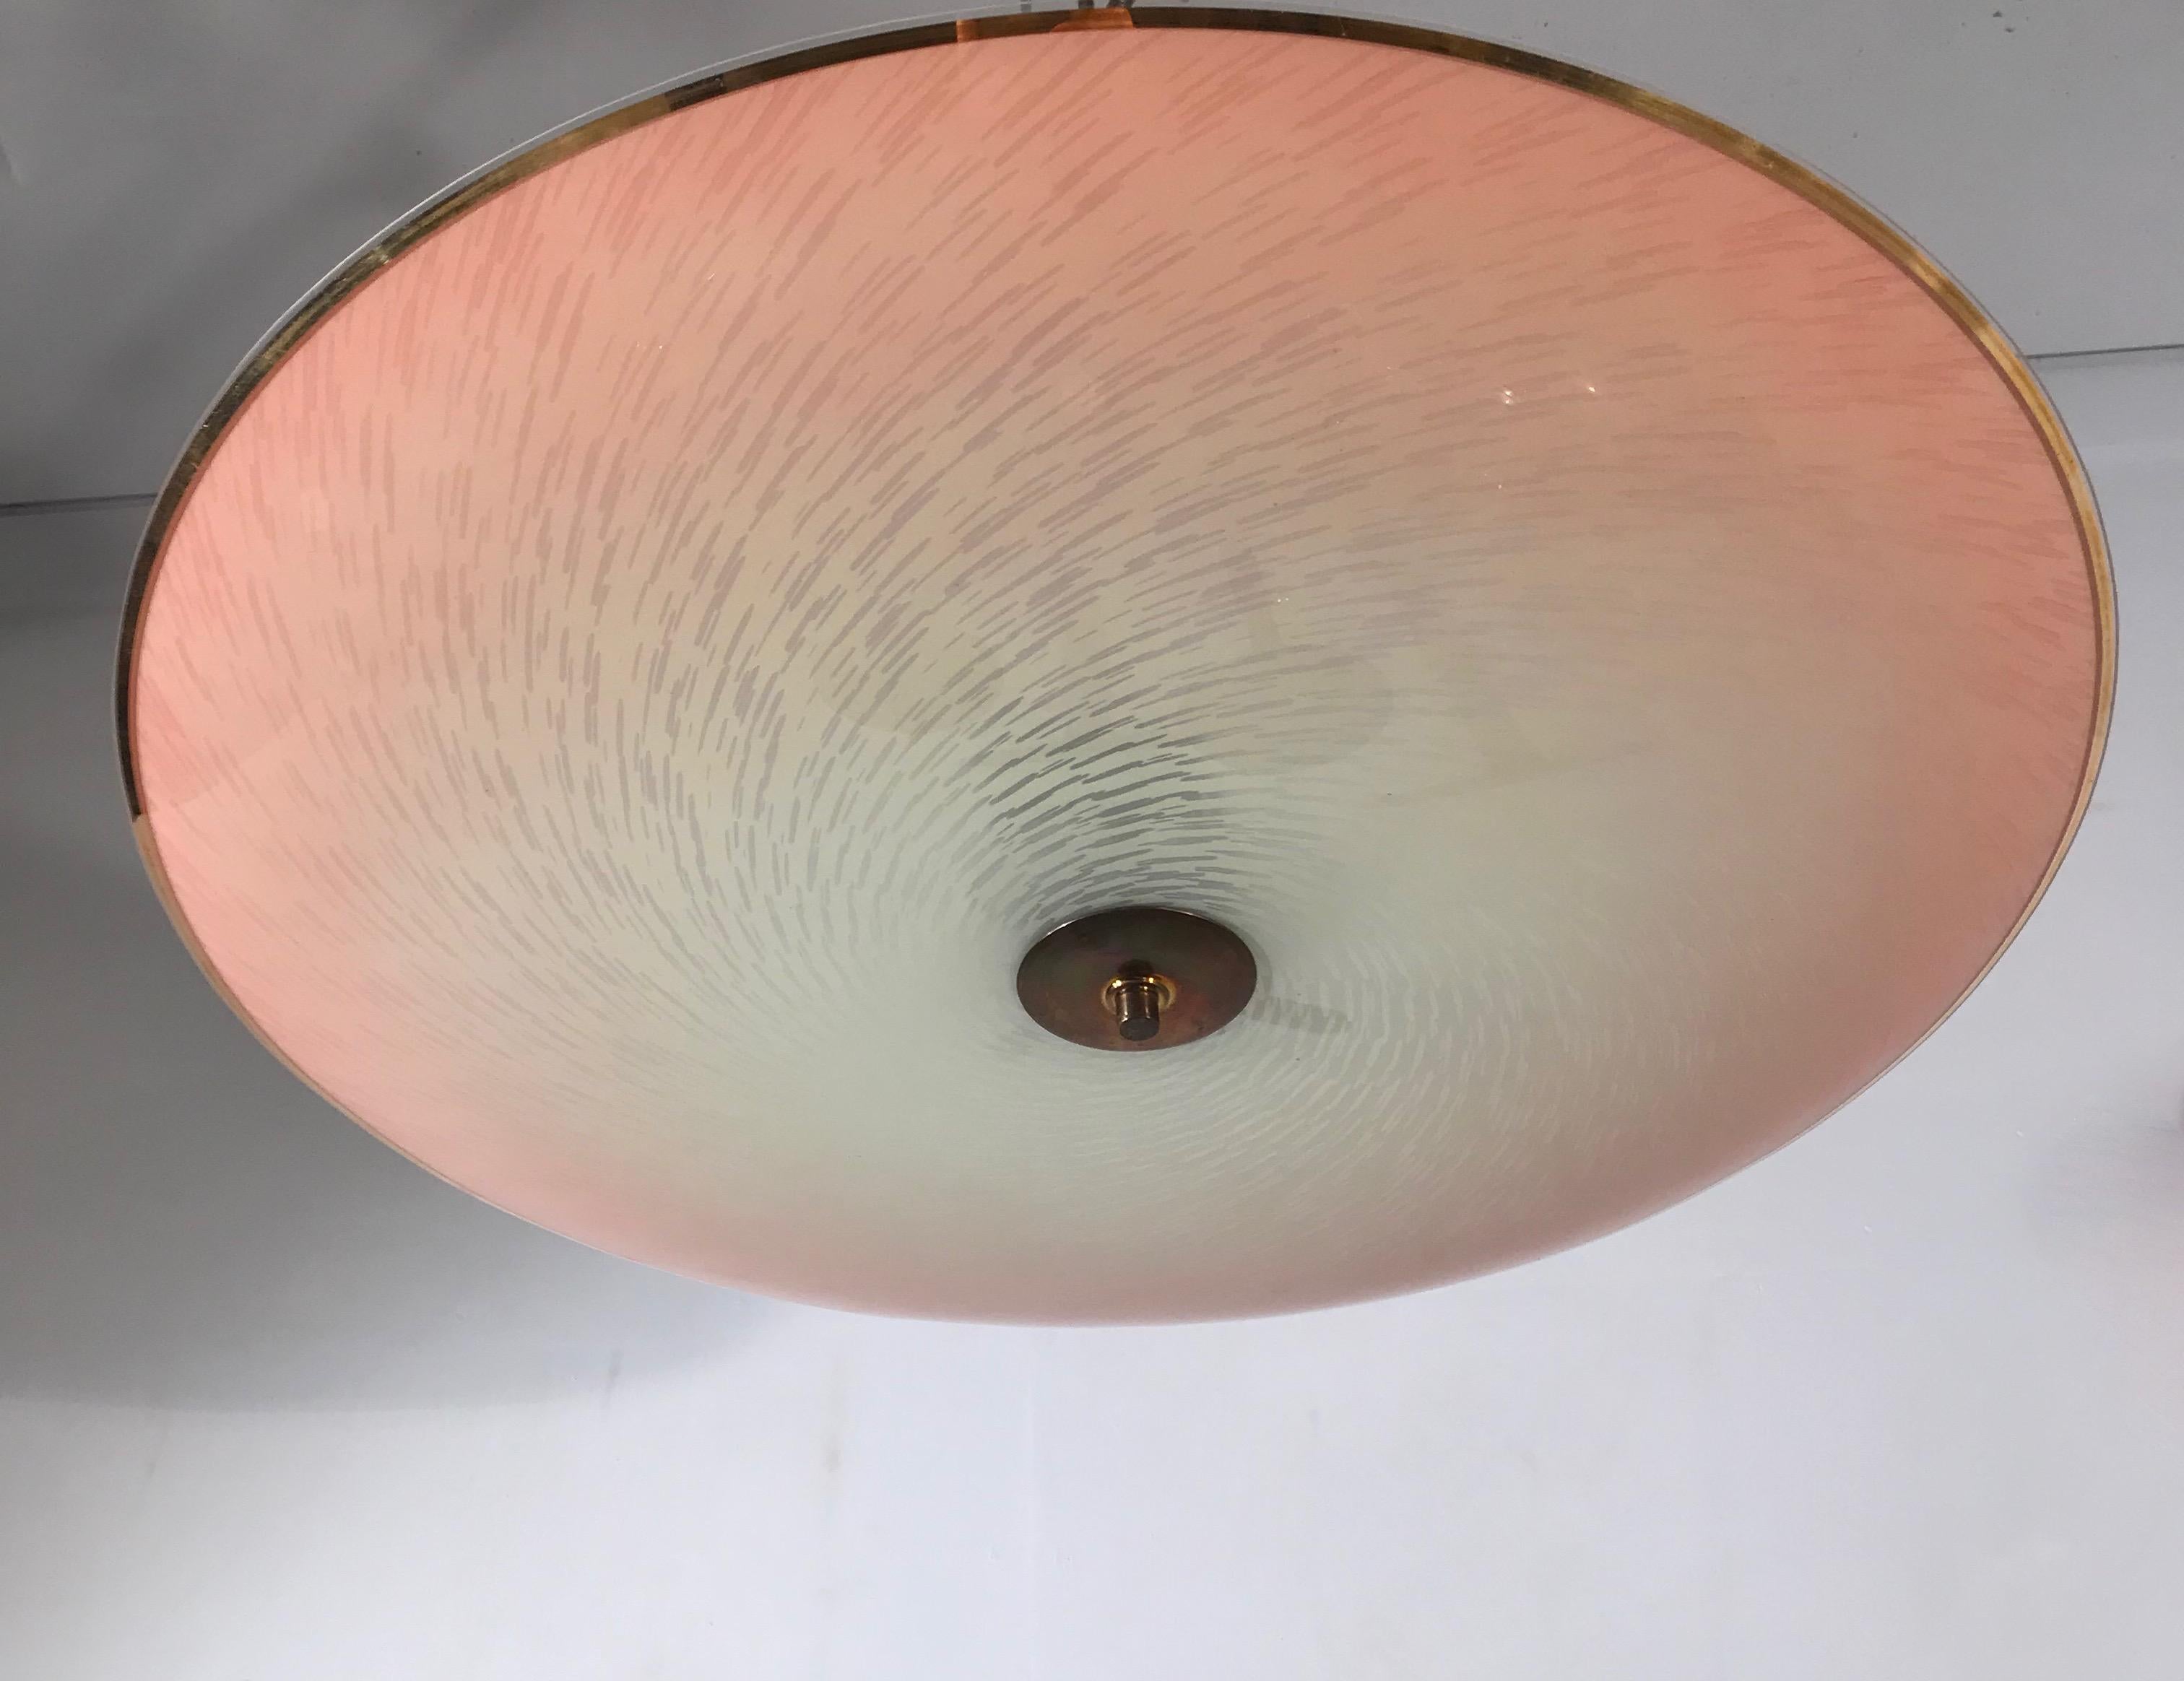 Beautiful shape and materials pendant from the Mid-Century Modern era.

This rare shape and large size flush mount has a stunning, glass shade with a striking, hurricane-like pattern. As you can see, the artistic and almost flat glass shade comes